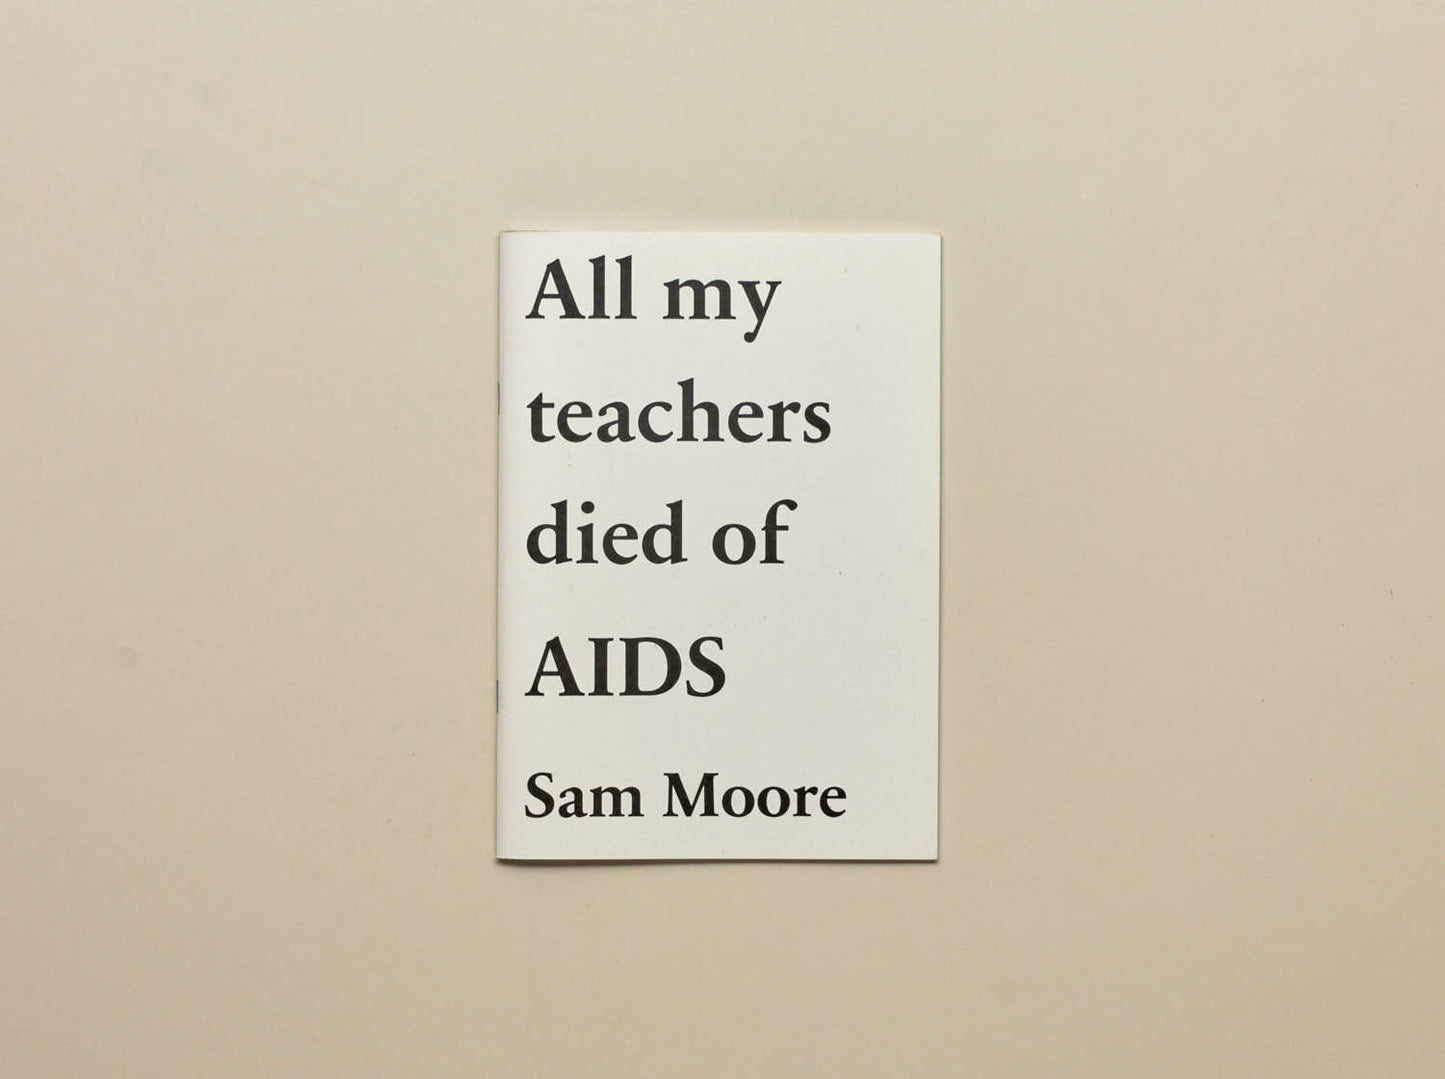 Sam Moore, All my teachers died of AIDS